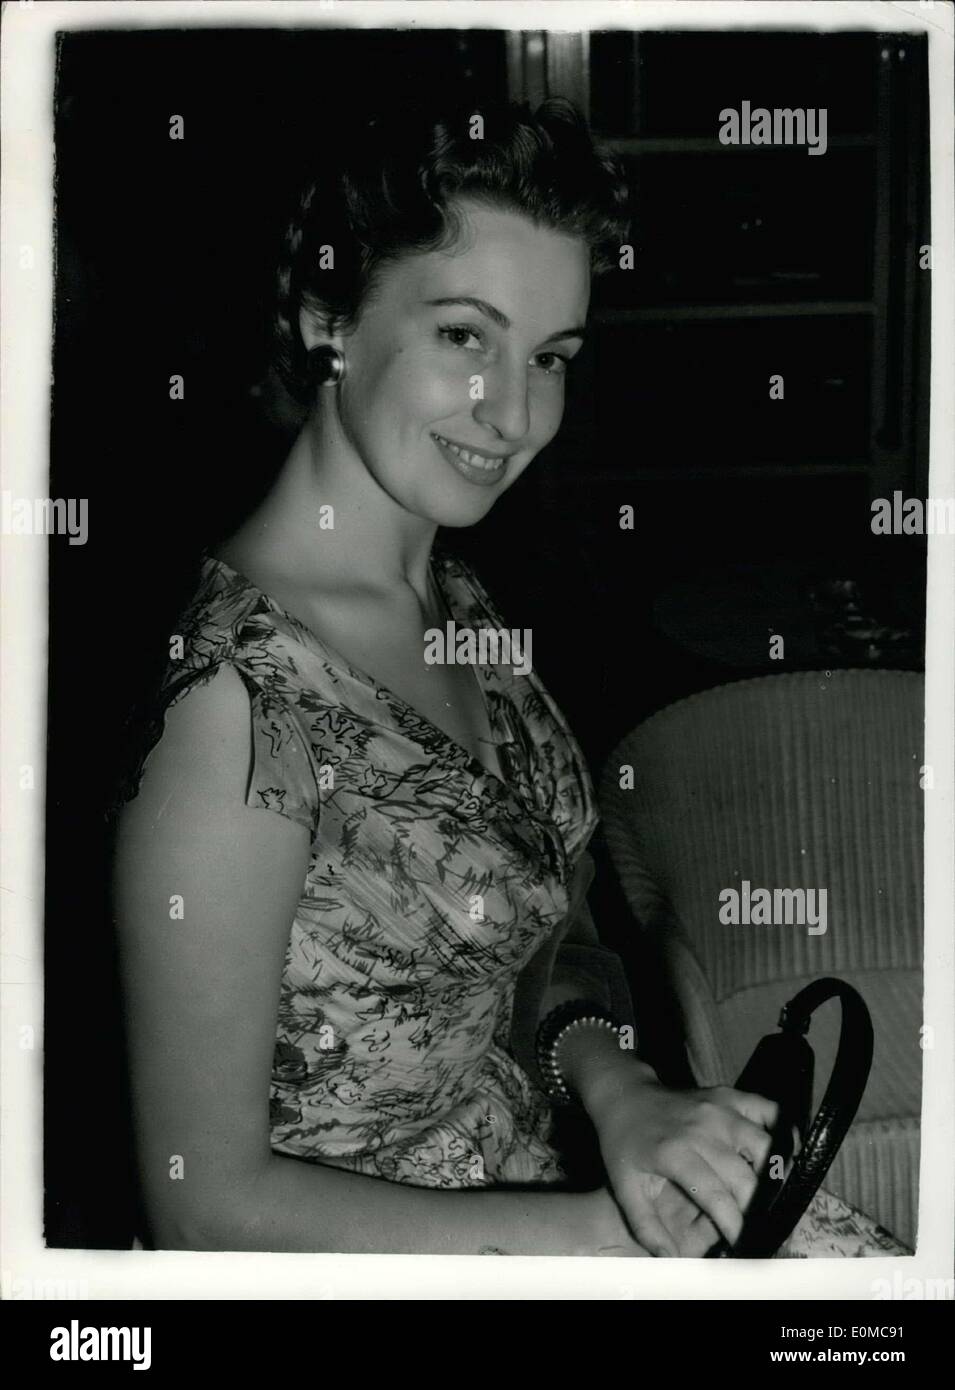 Jun. 10, 1954 - Italian TV Announcer Arrives in London. Fulvia Colombo, the Italian woman TV announcer, arrived at London Airport this evening. She will soon be seen and heard, on Britain's television screens when with other ''speakeriness'' she will introduce Eurovision programmes. Photo Shows: Fulvia Colombo seen in the lounge on her arrival at London Airport this evening. Stock Photo